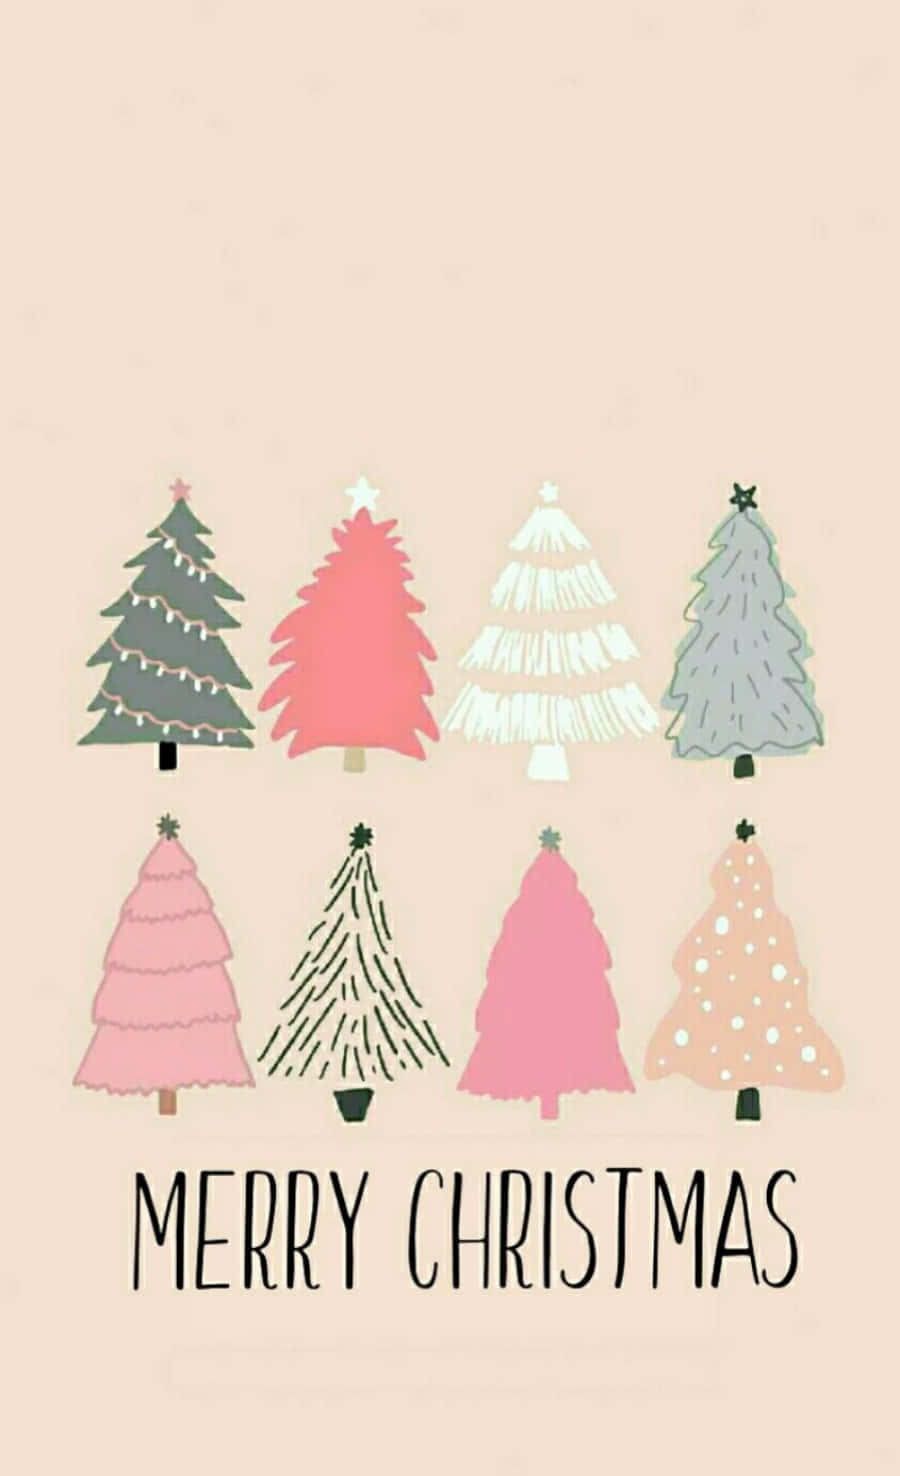 Spread the Christmas Spirit with a Cute Phone Wallpaper